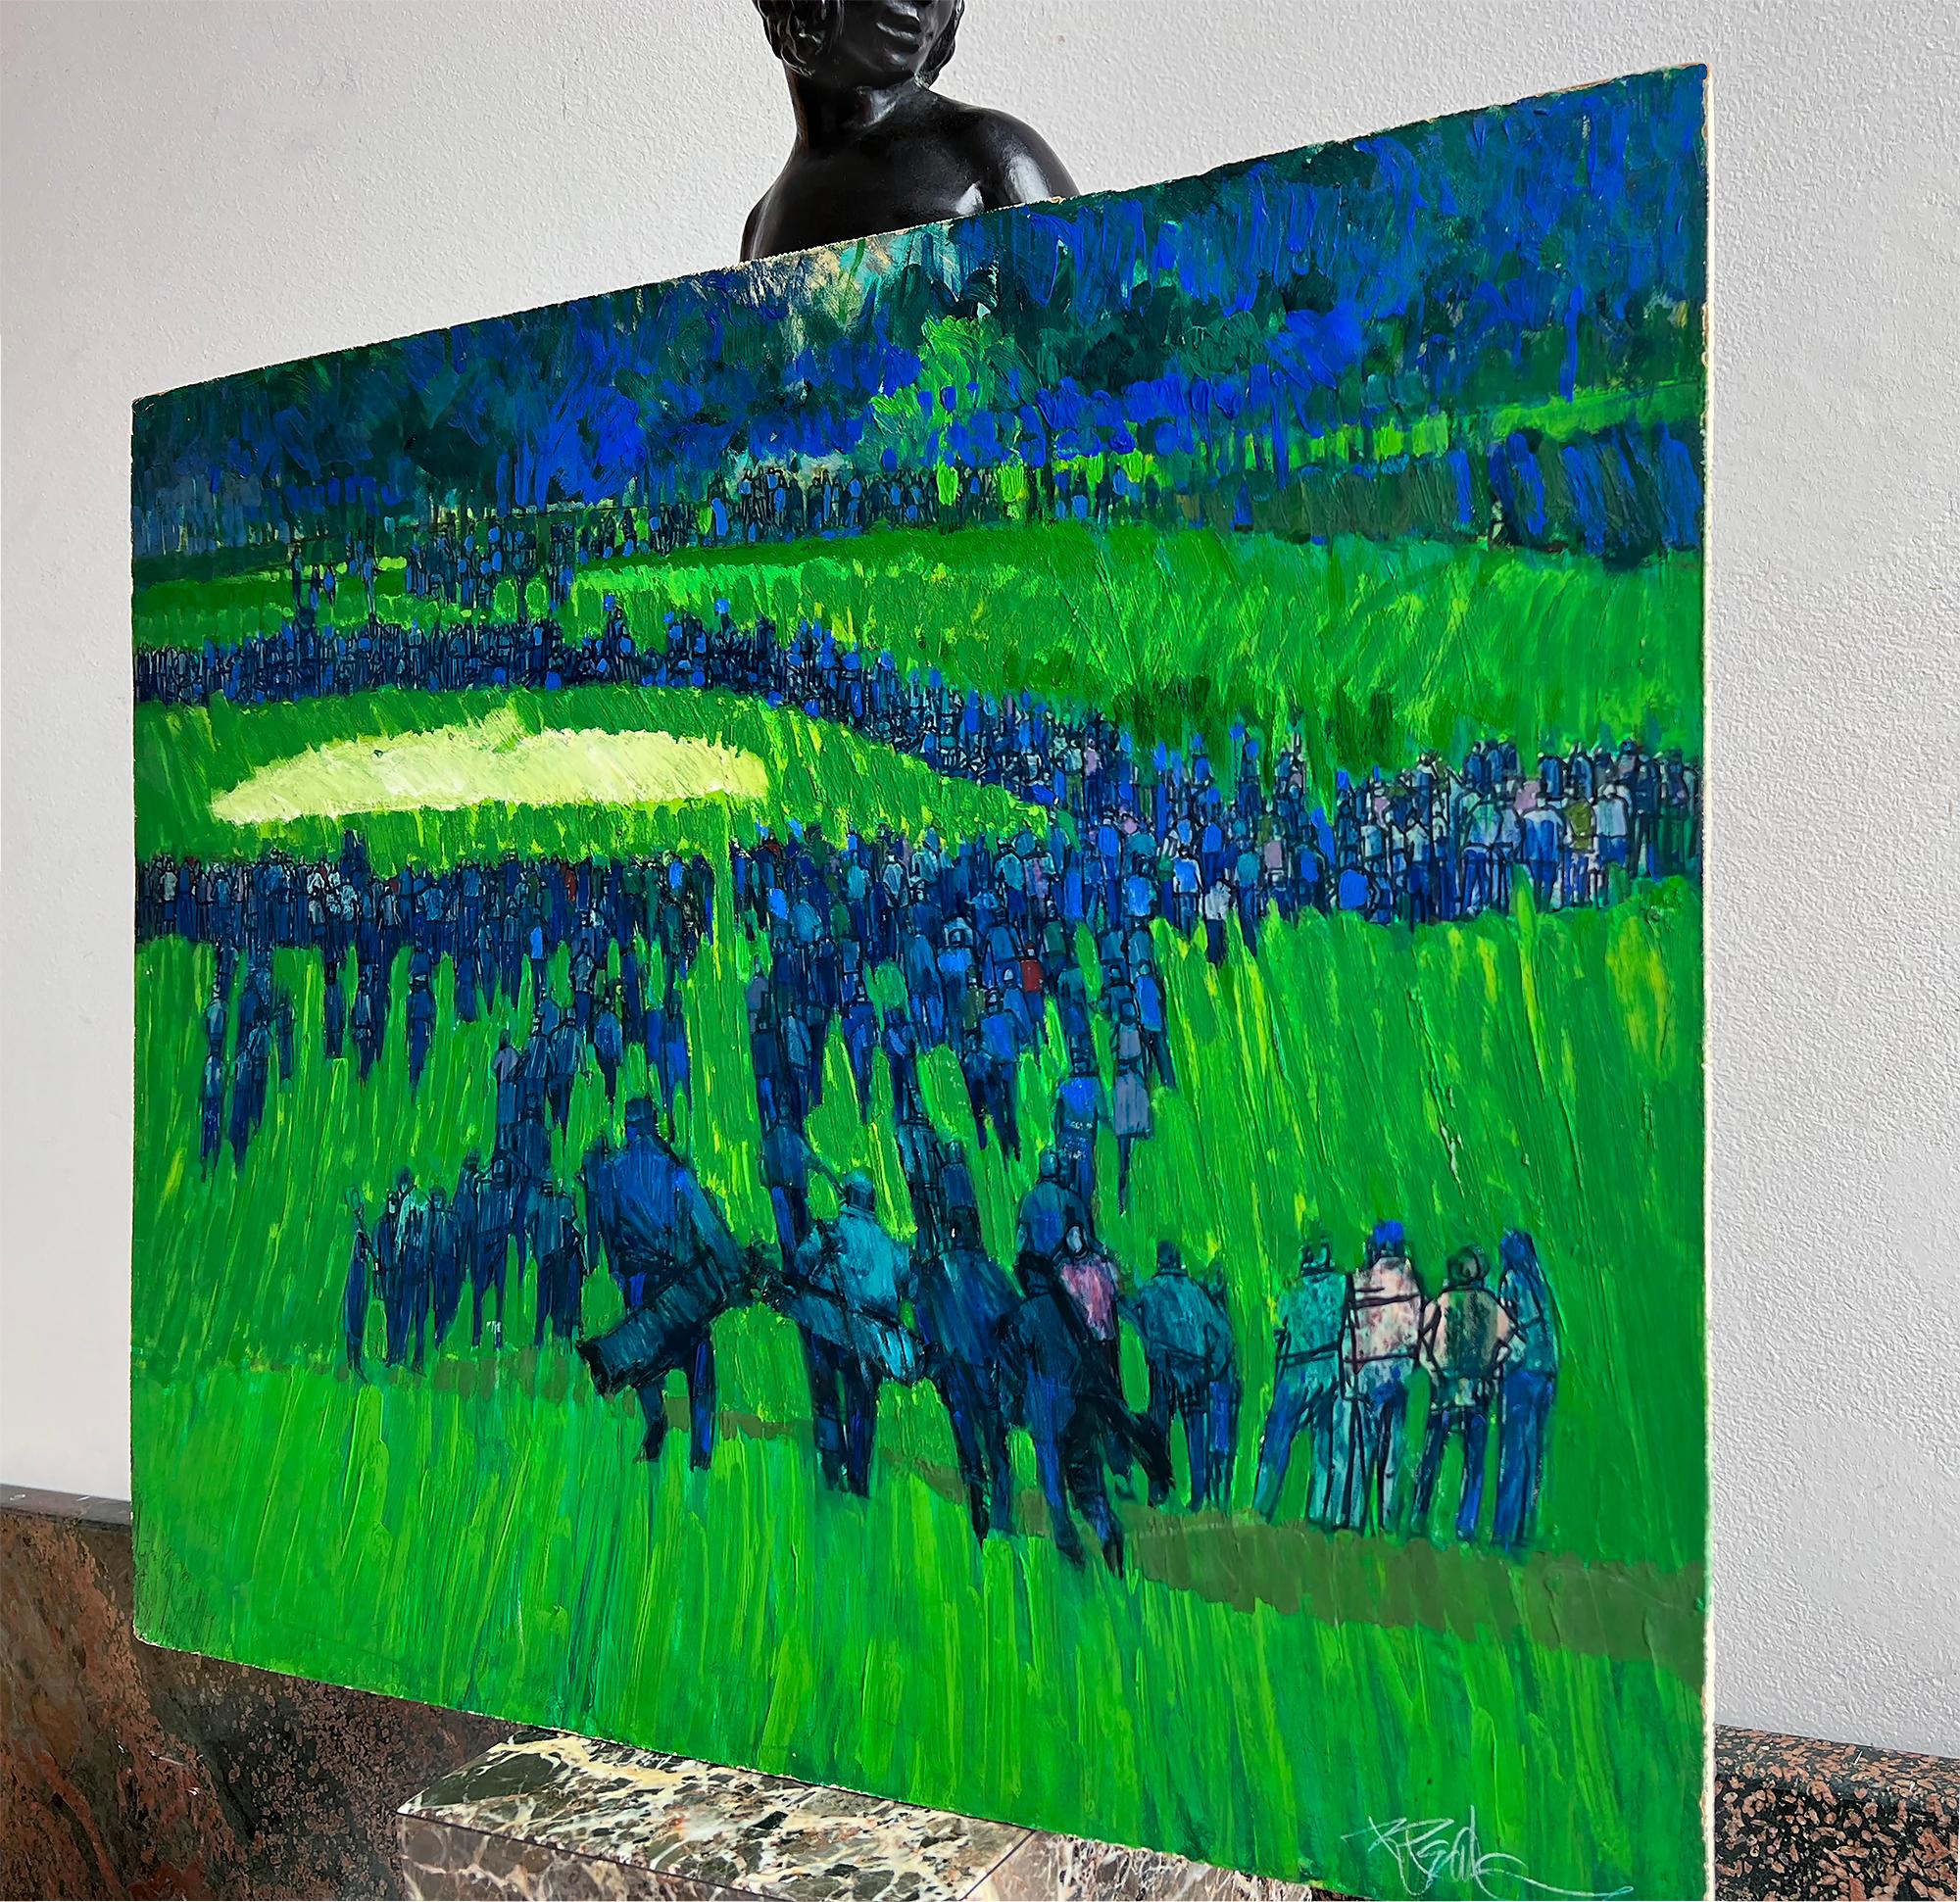 Revolutionary artist and illustrator Bob Peak creates a stunning work of golf-themed art that straddles representation and abstraction. Clearly, Peak drew inspiration from the color-field movement being featured in galleries in downtown Manhattan.